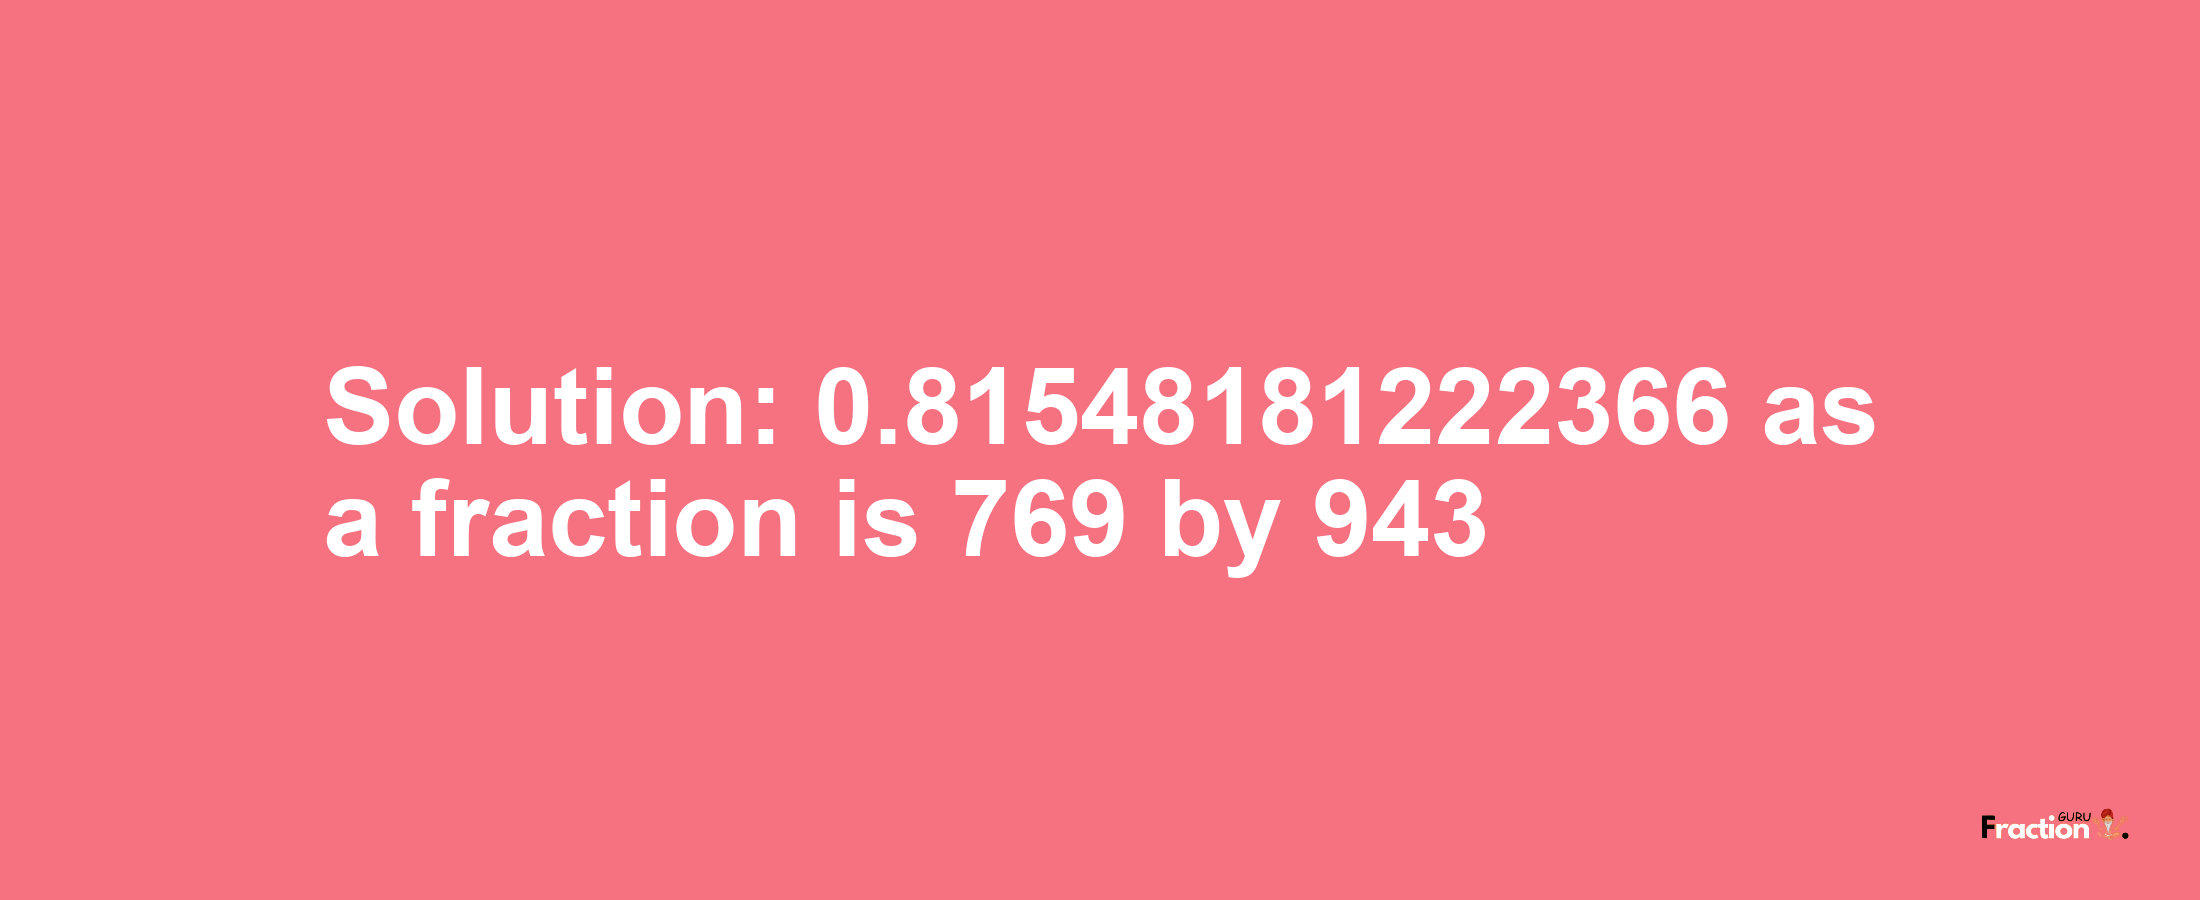 Solution:0.81548181222366 as a fraction is 769/943